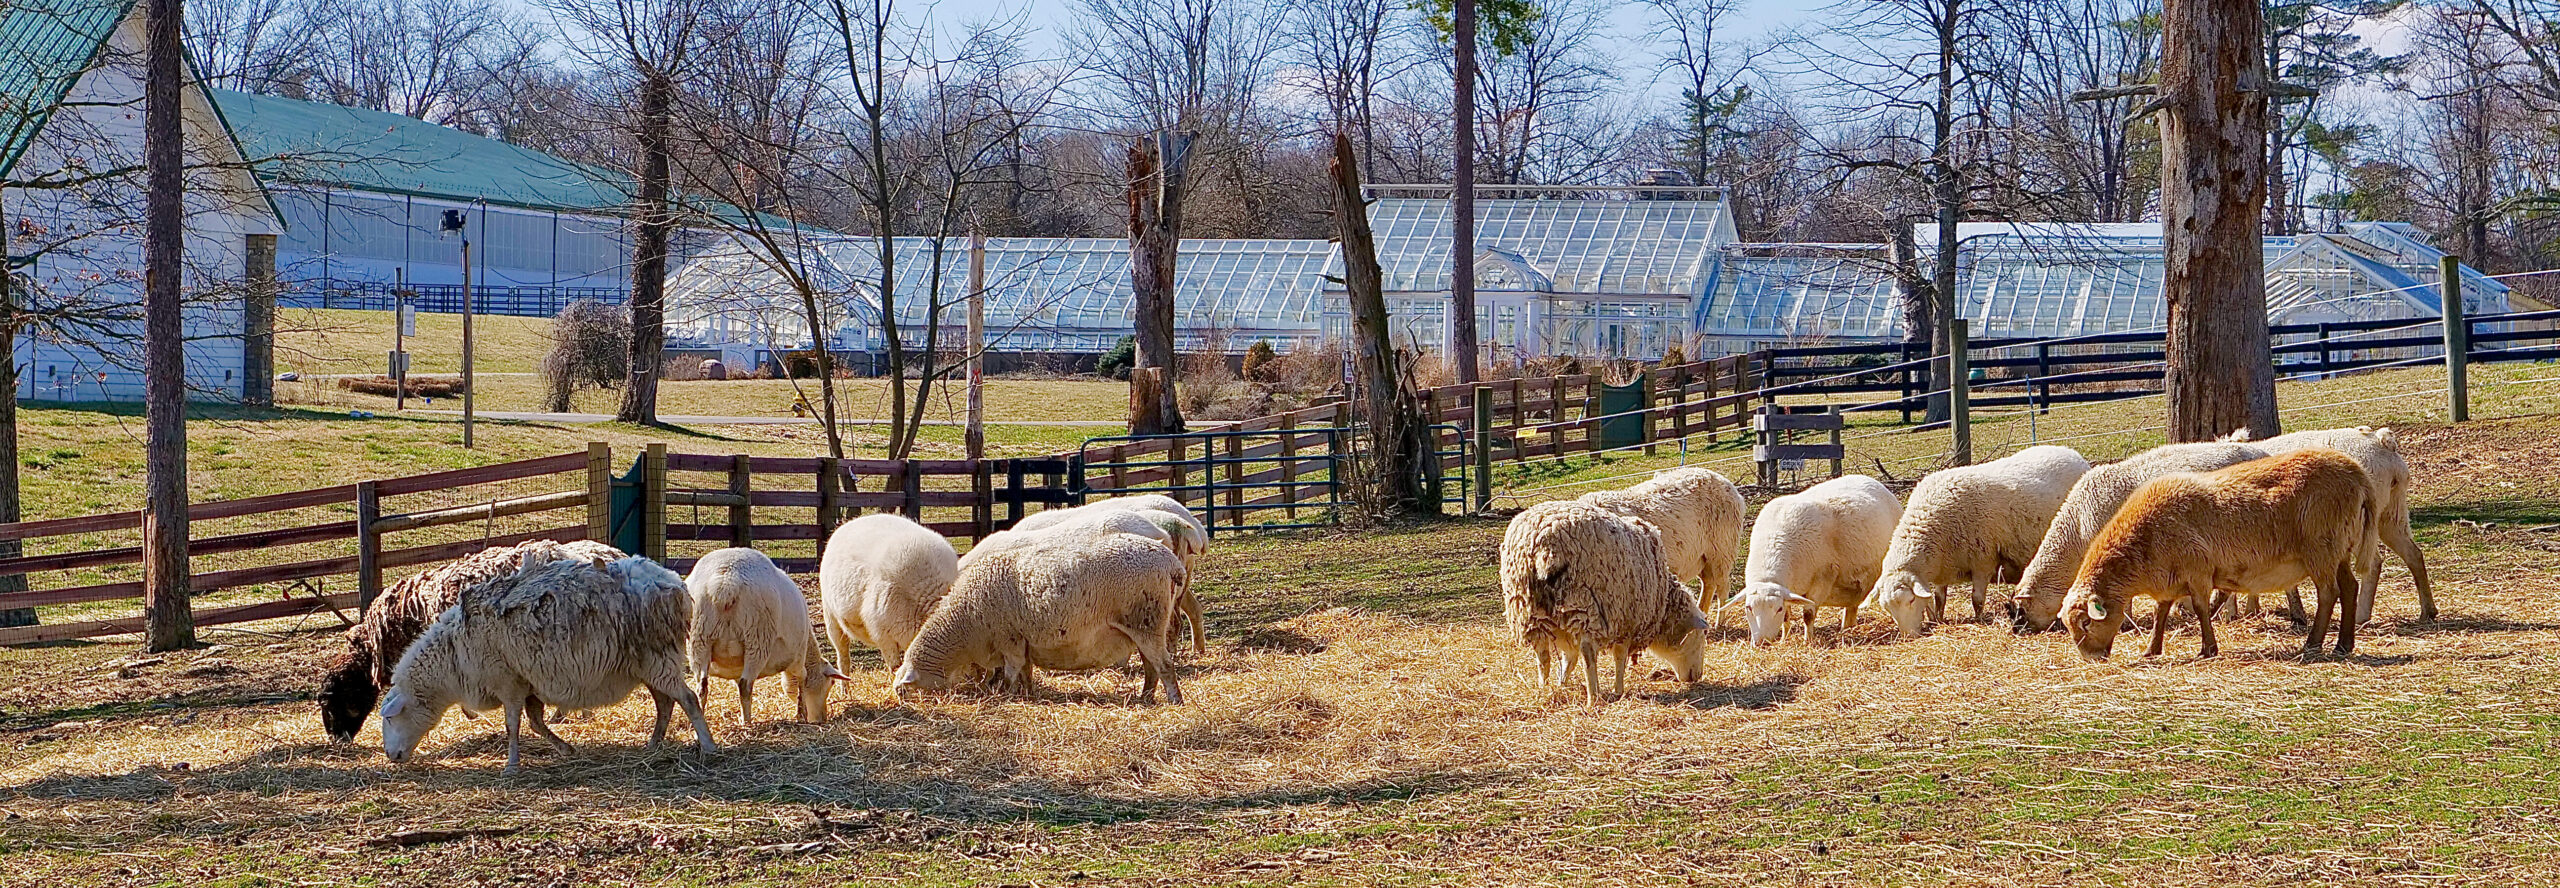 Image of sheep grazing on hay in sunlit pasture with greenhouse and tree-line in background